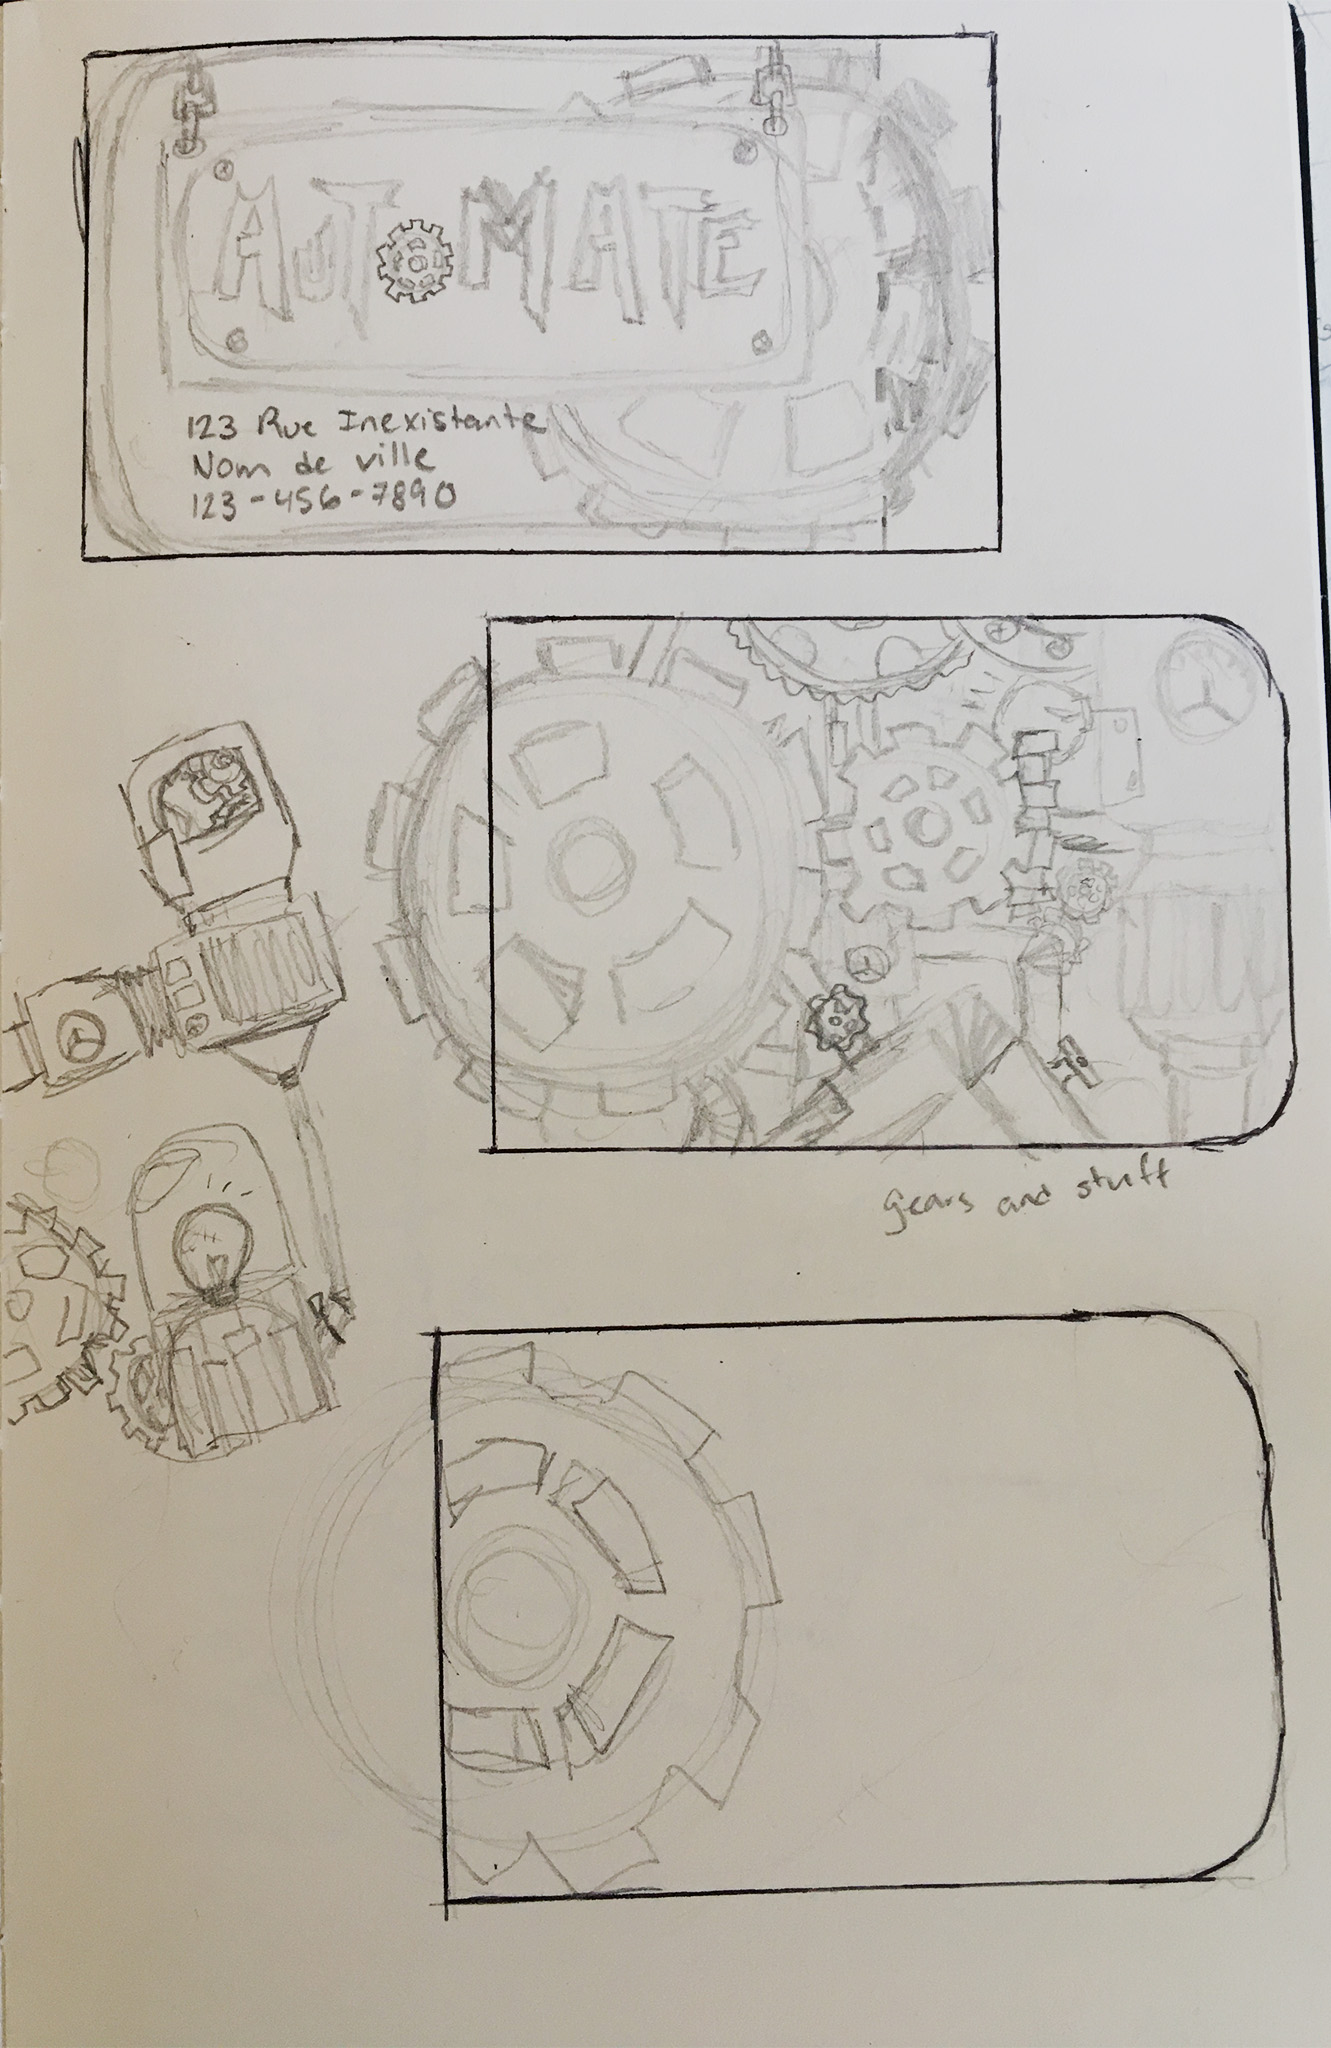 Sketches of the moving cog business card